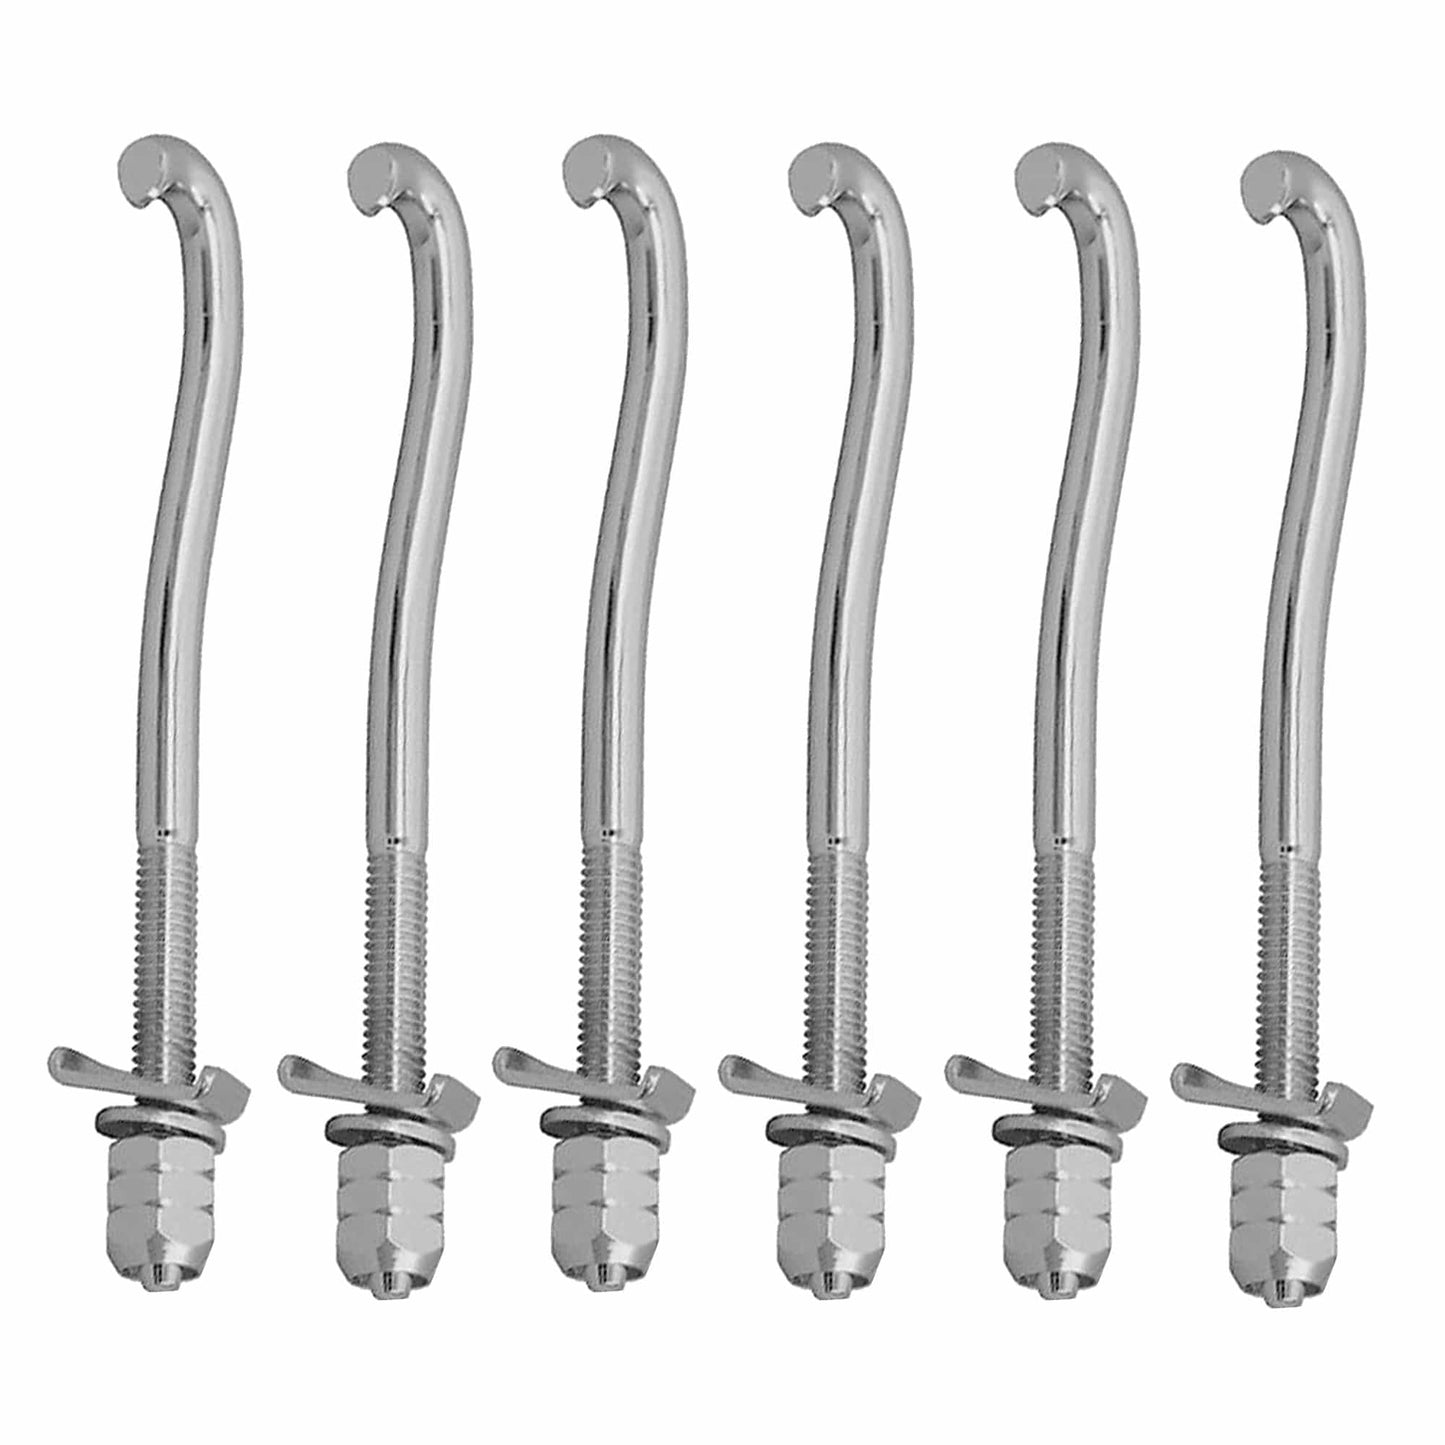 LP Matador Conga Lugs (6 Pack Bundle) Drums and Percussion / Parts and Accessories / Drum Parts